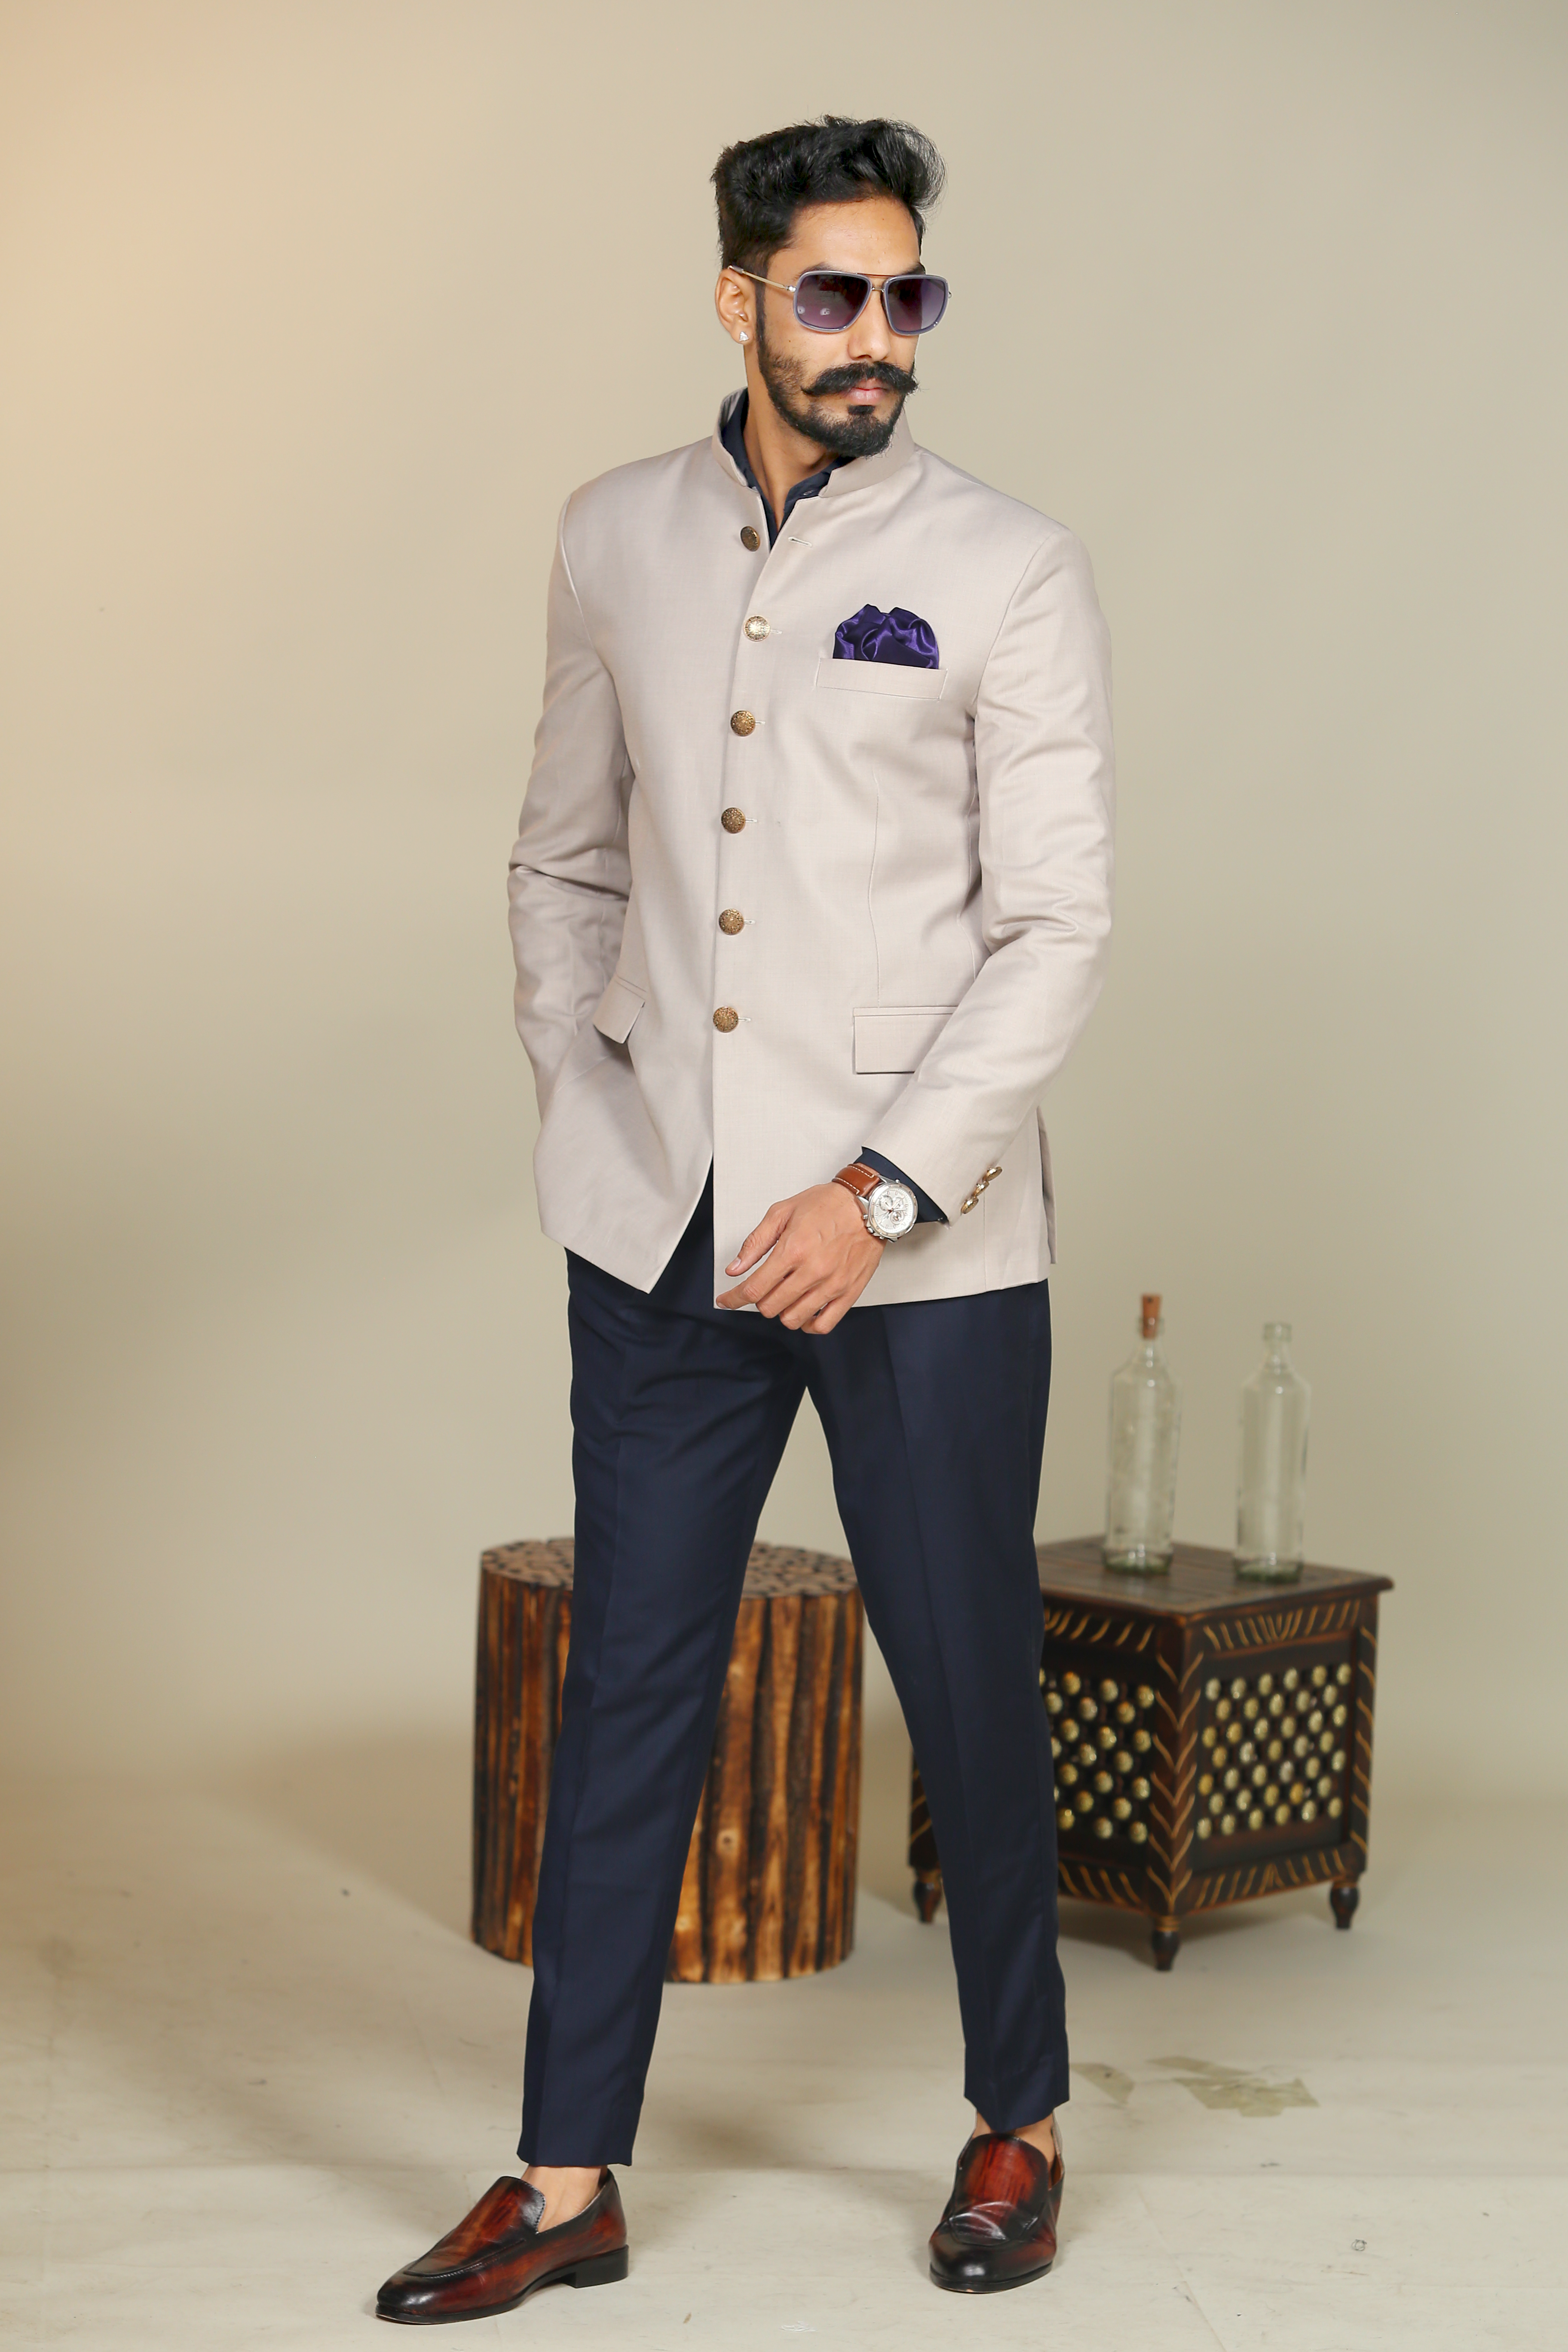 Light Grey Color Bandhgala With Navy Blue Trouser